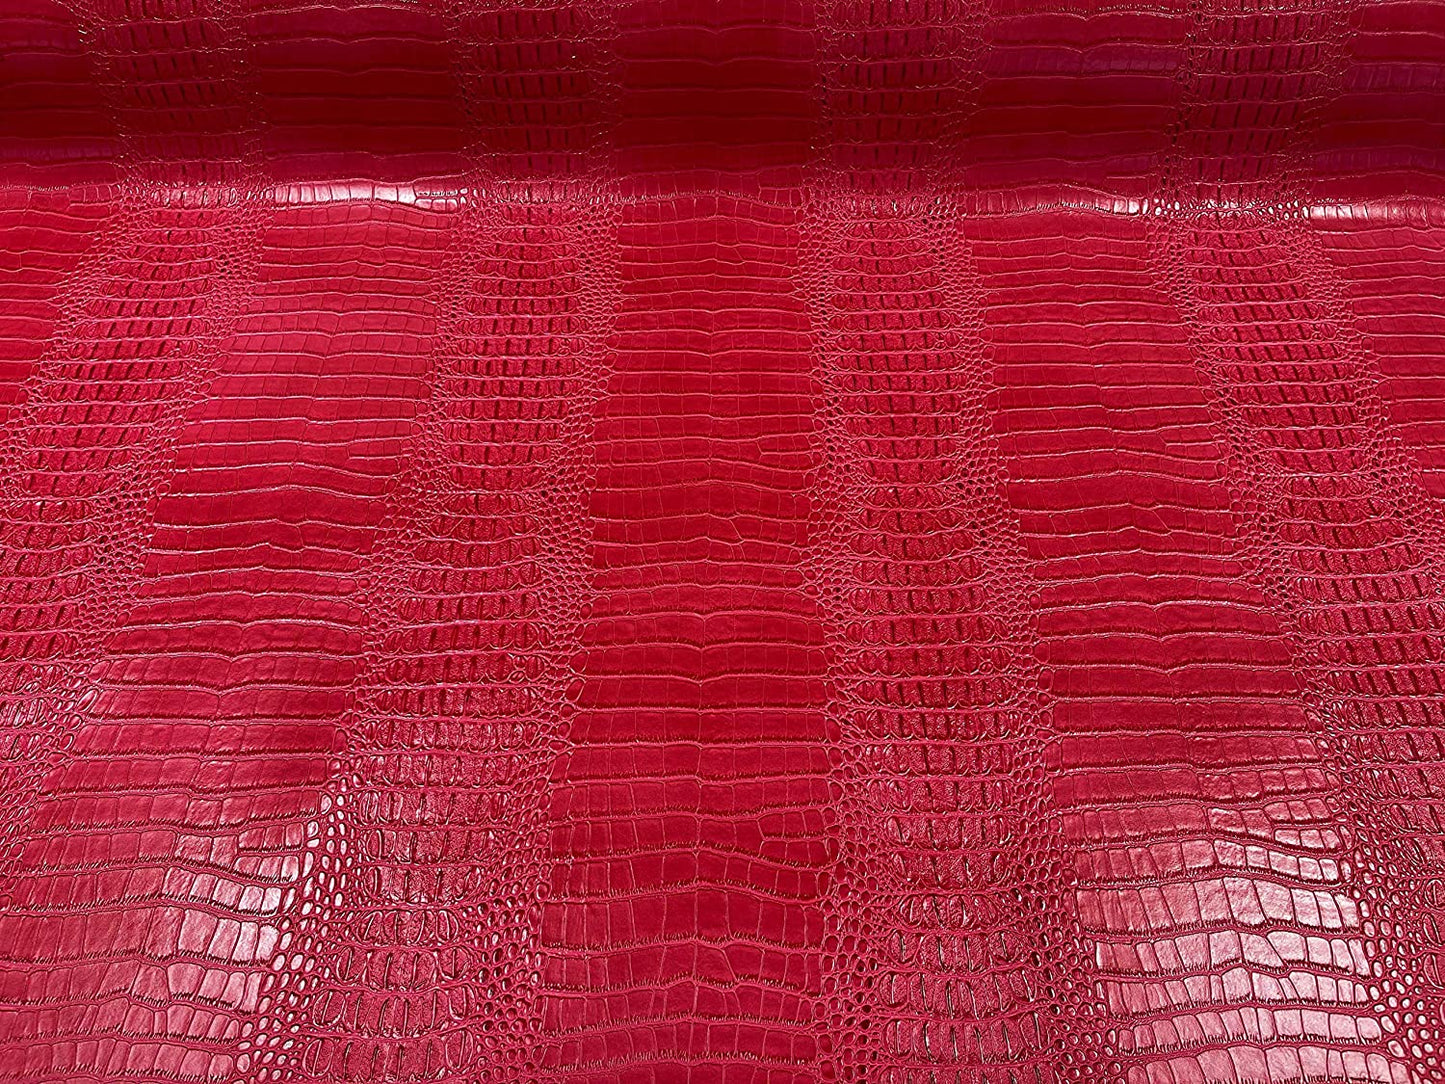 53/54" Wide Gator Fake Leather Upholstery, 3-D Crocodile Skin Texture Faux Leather PVC Vinyl Fabric (Red, 1 Yard)